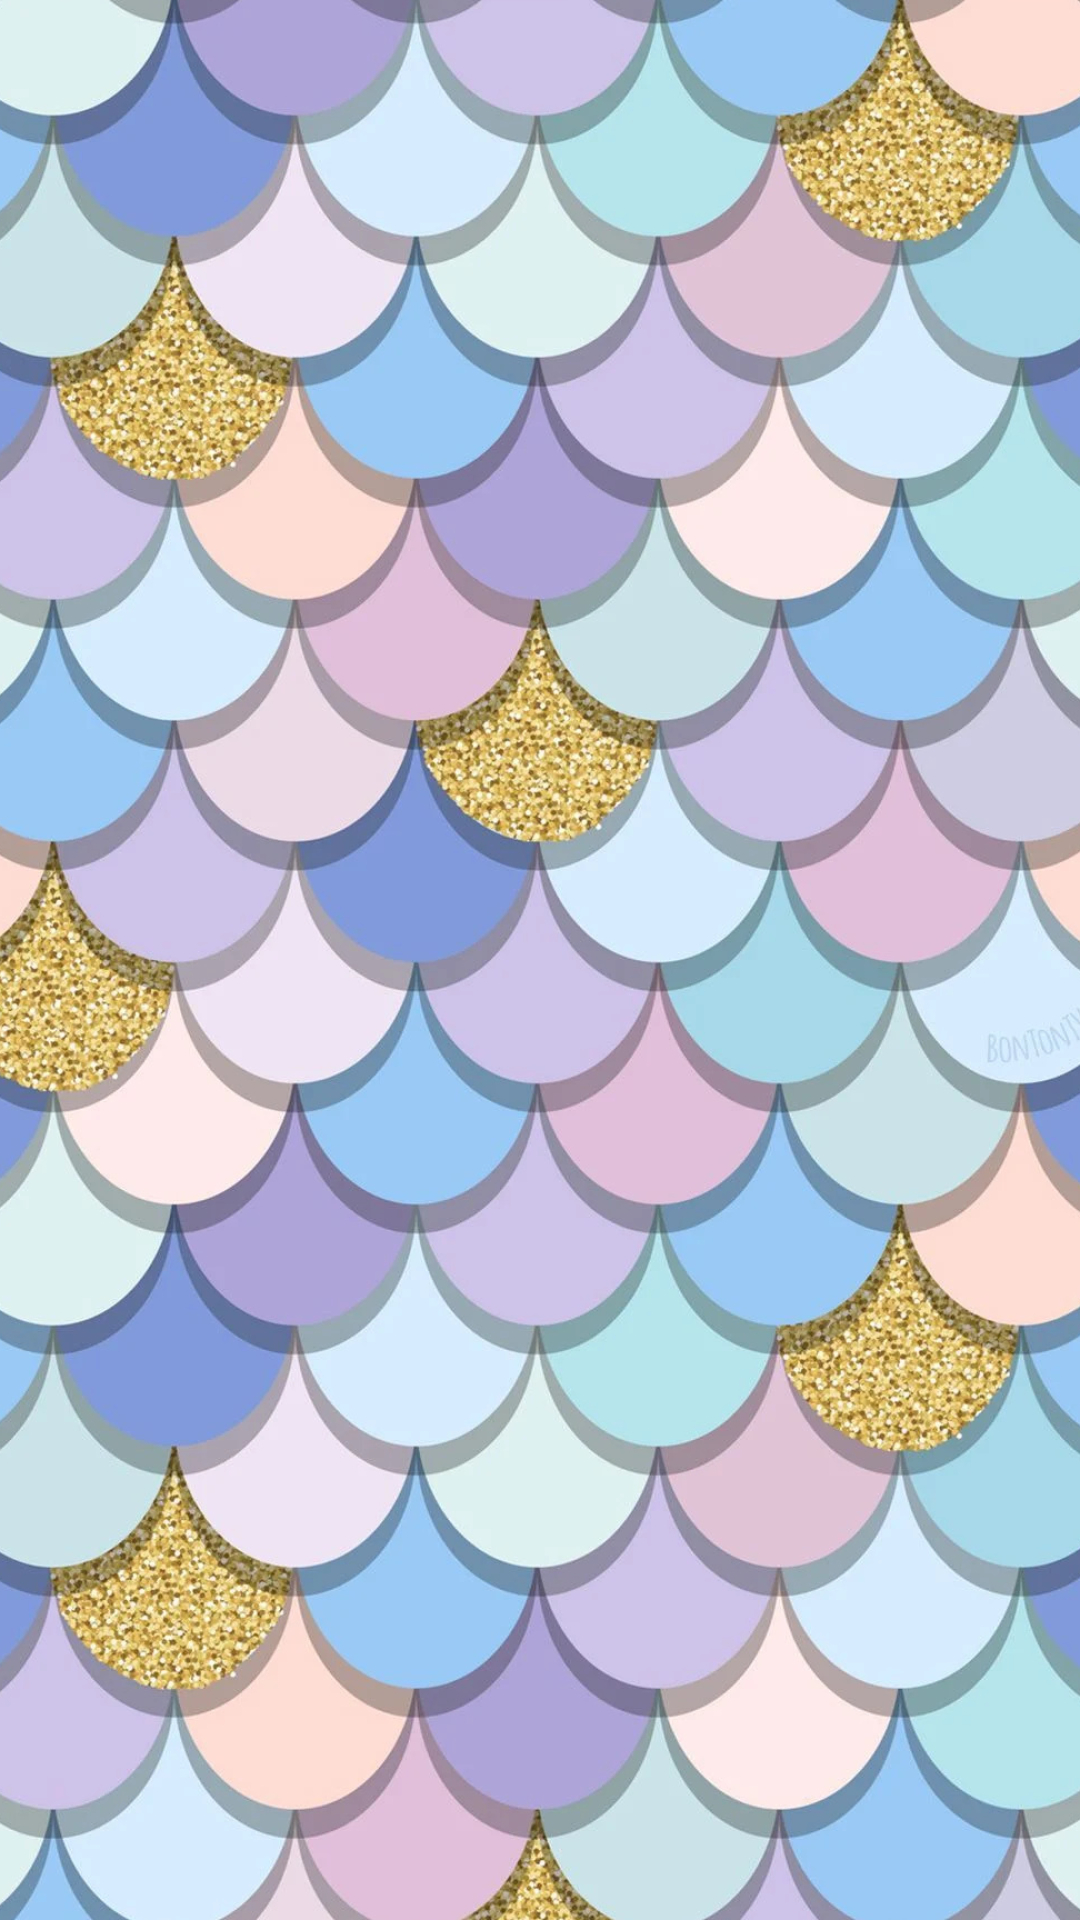 Mermaid scales iPhone, Beautiful wallpapers, Phone backgrounds, Whimsical design, 1080x1920 Full HD Phone